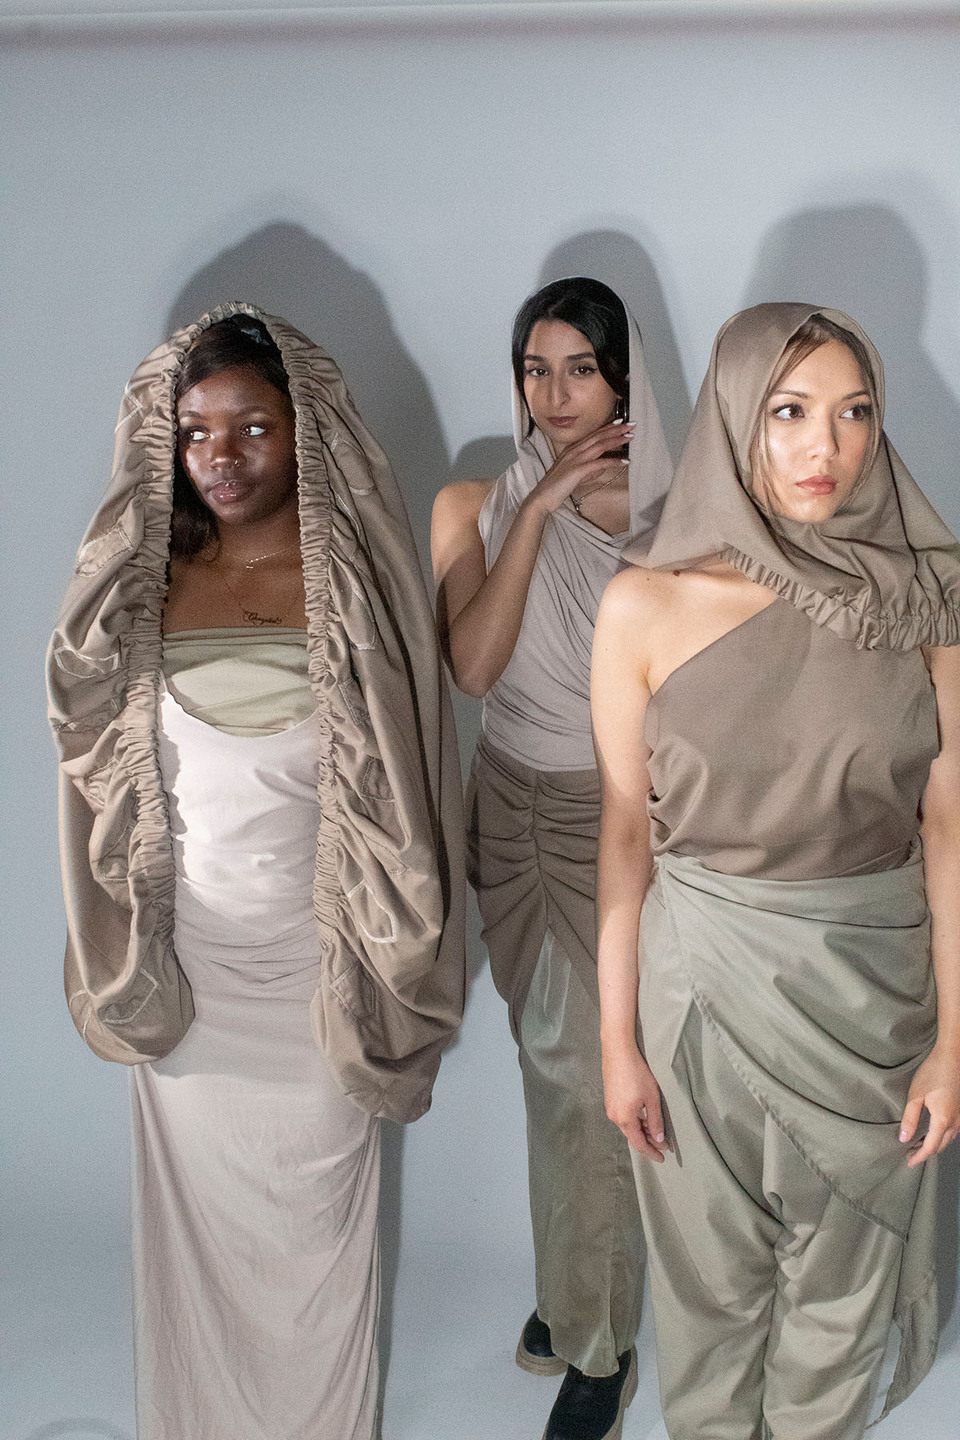 Three women model dresses, trousers and headscarves inspired by traditional Yemeni clothing with a futurist twist